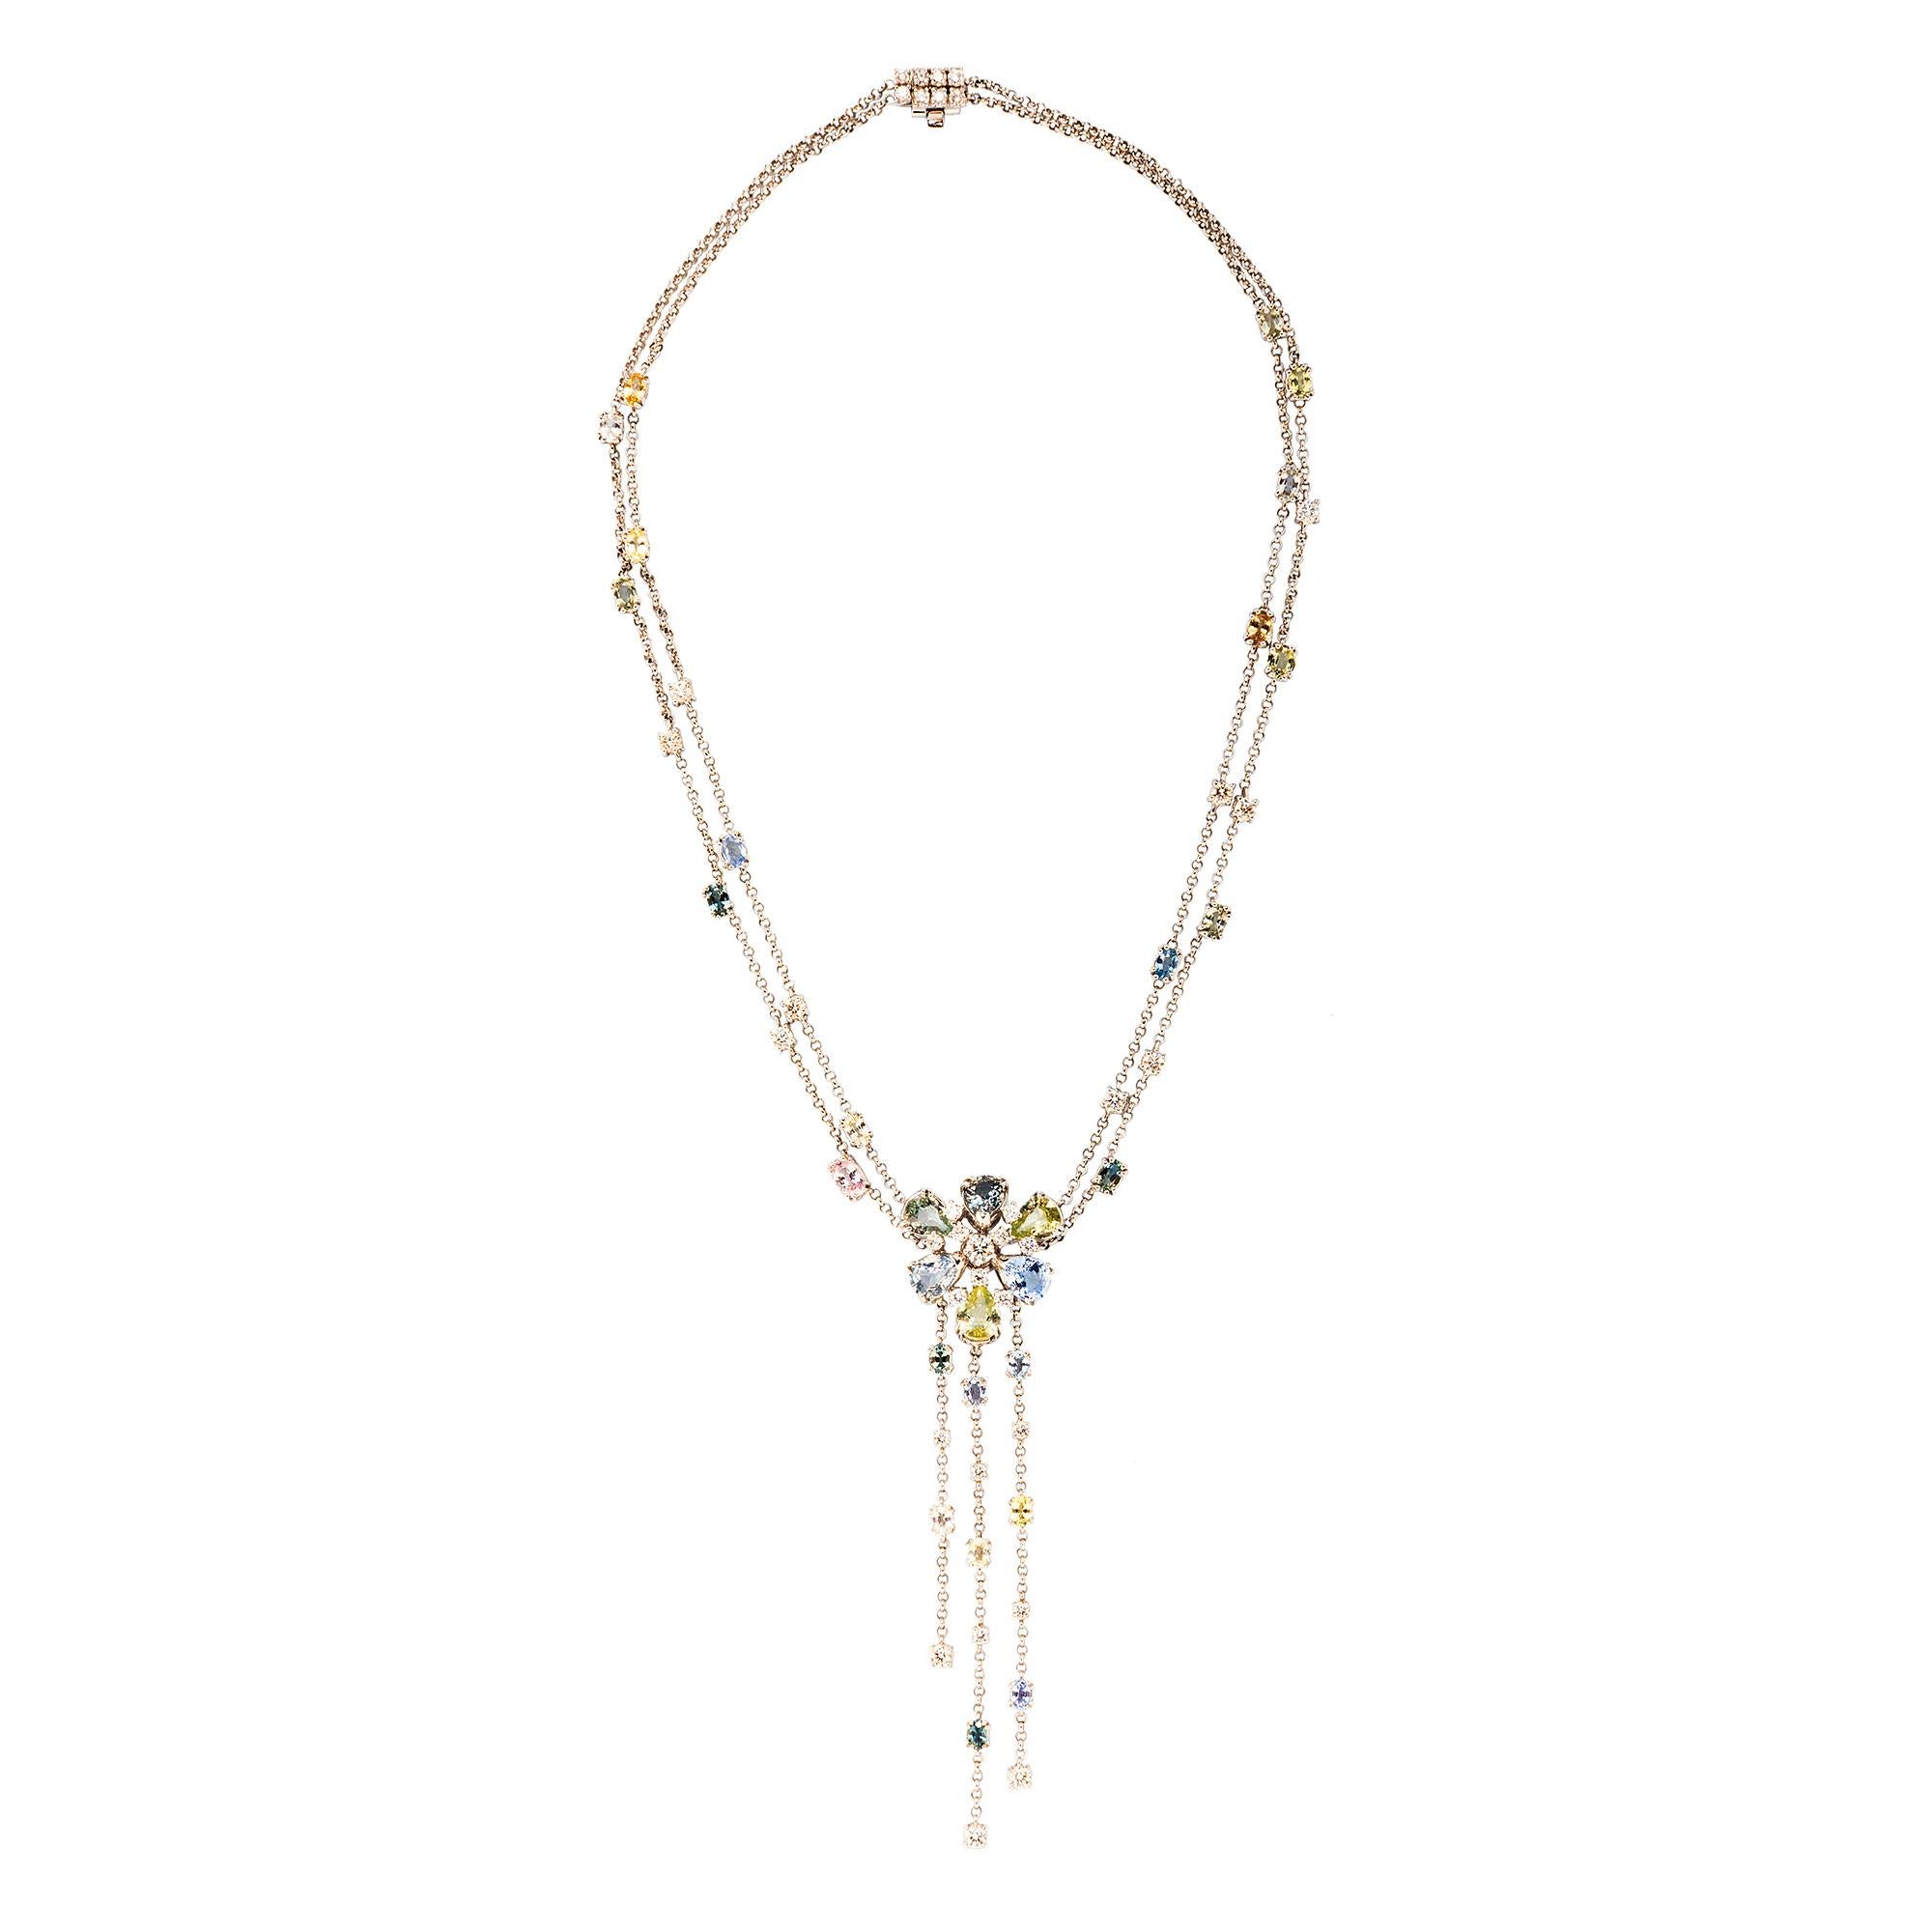 Two rows of cable link chain interspersed with pastel faceted oval sapphires and diamonds suspend a central flower made of pear-shaped pale green and purple sapphires. The flower design is accented by three rows of sapphire and diamond fringe.

-